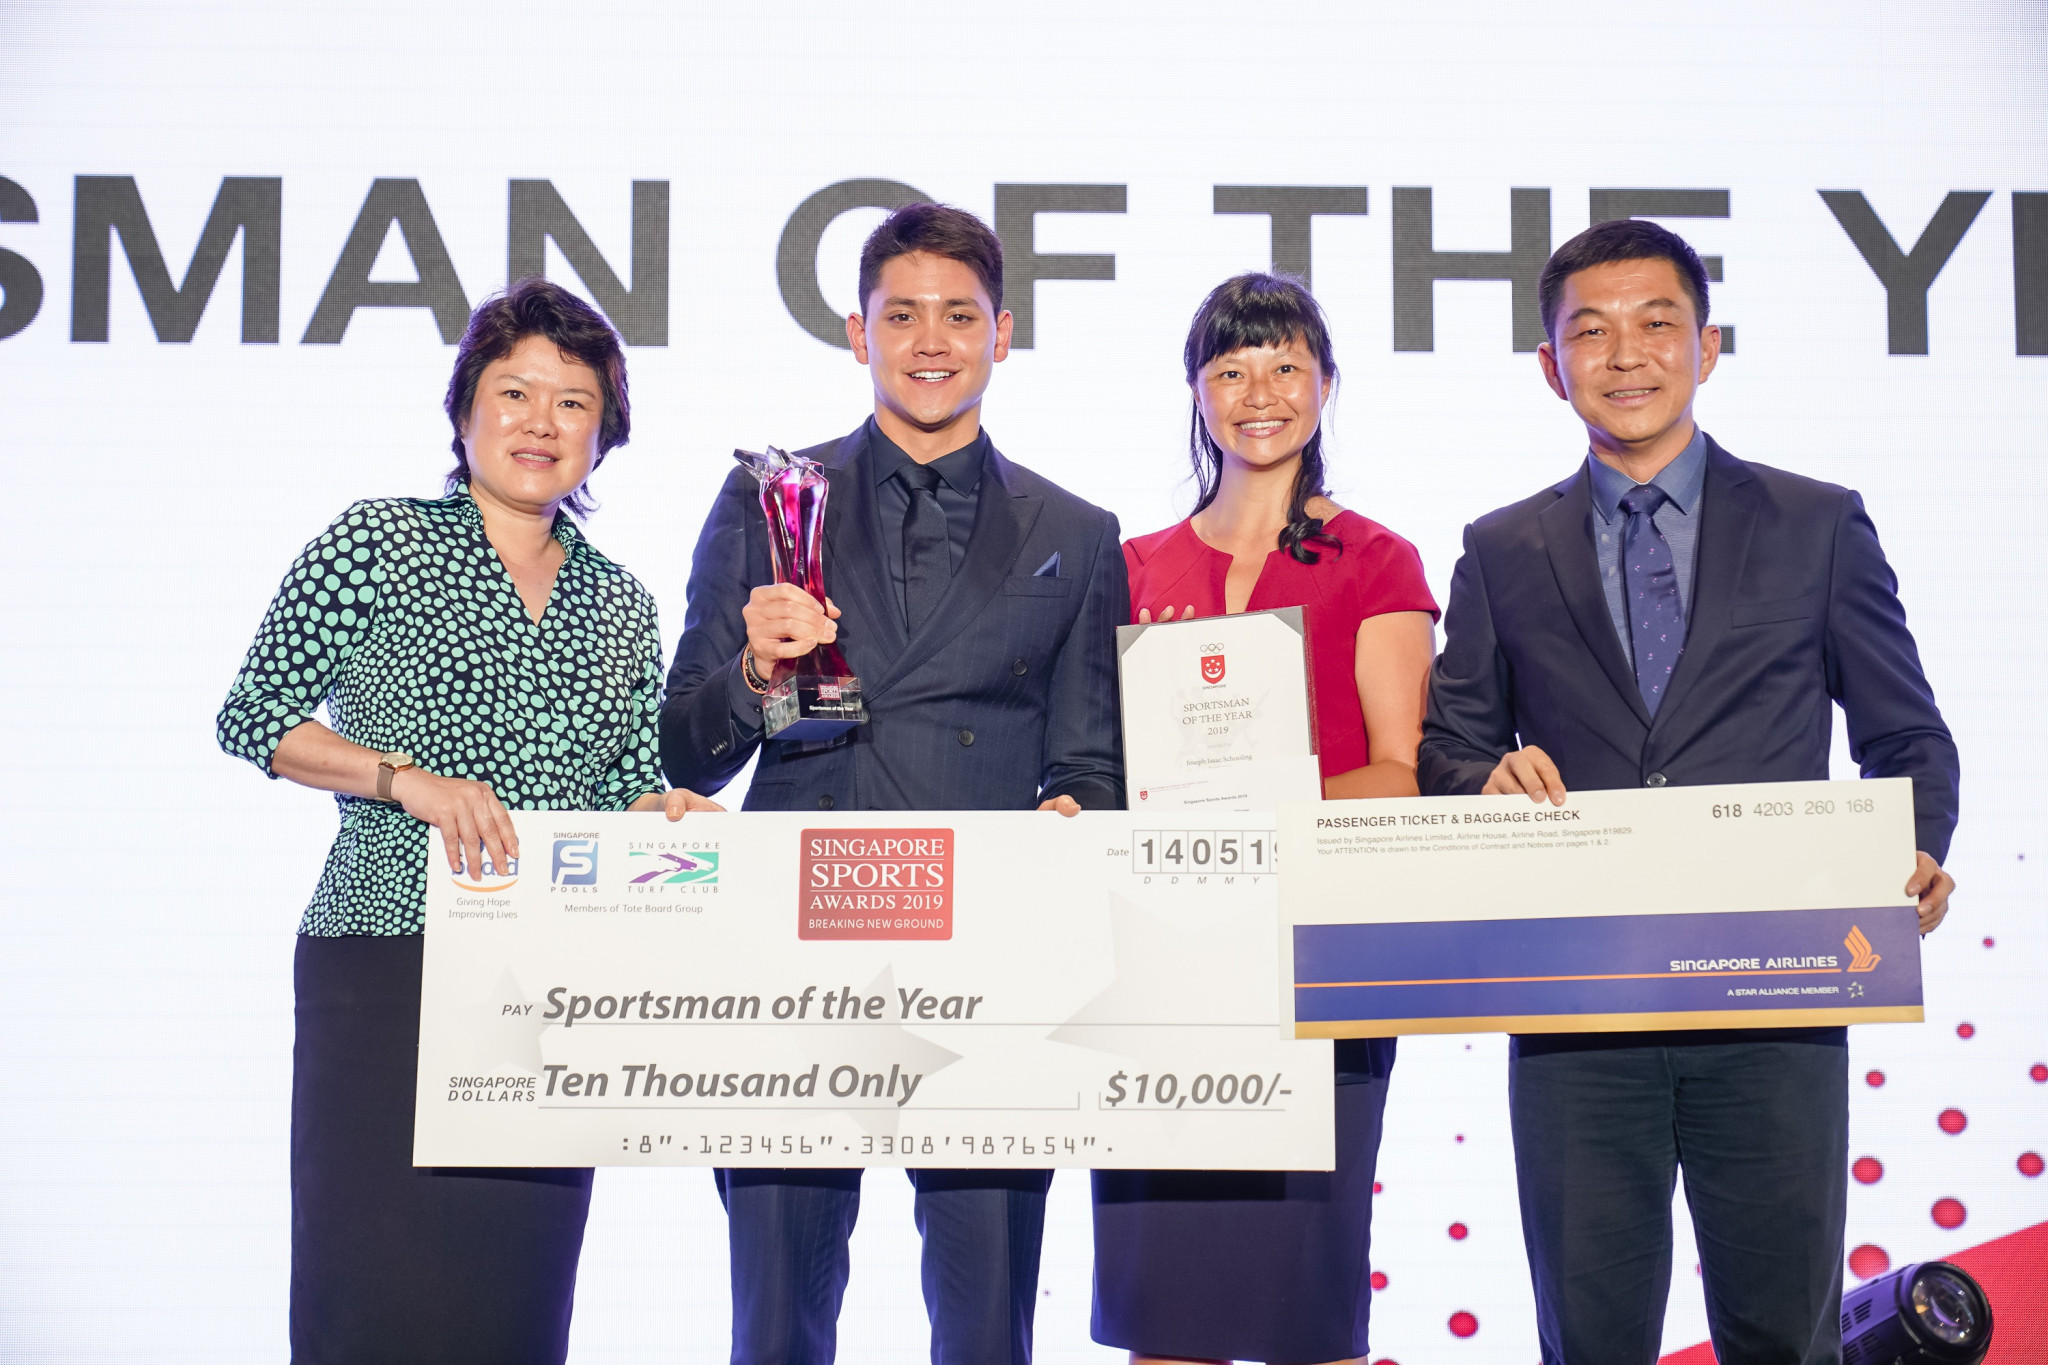 Swimmer Schooling and shooter Veloso named Singapore's sportsman and sportswoman of the year